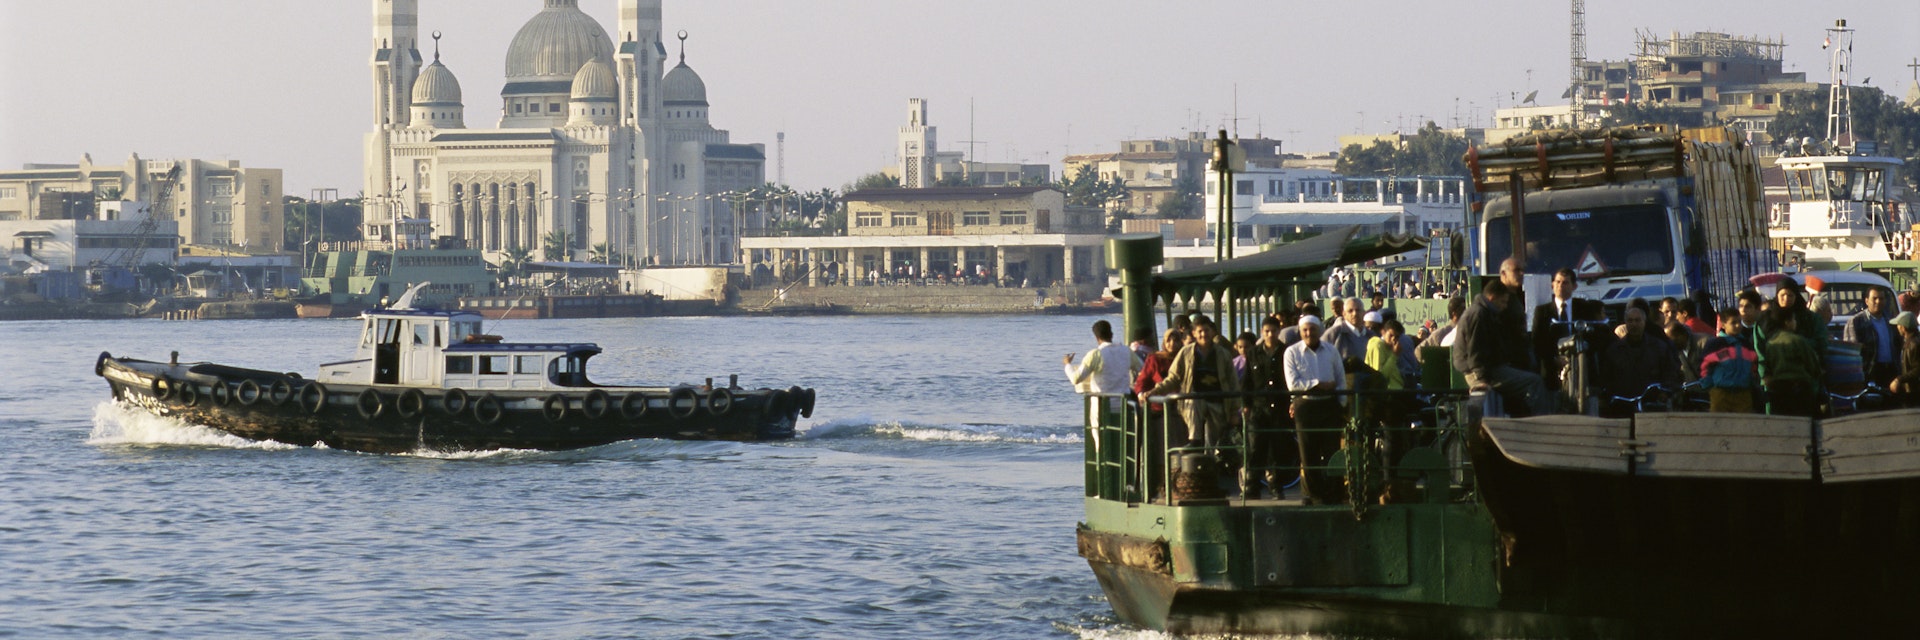 Ferry across the entrance to the Suez Canal, Port Said, Egypt, North Africa, Africa